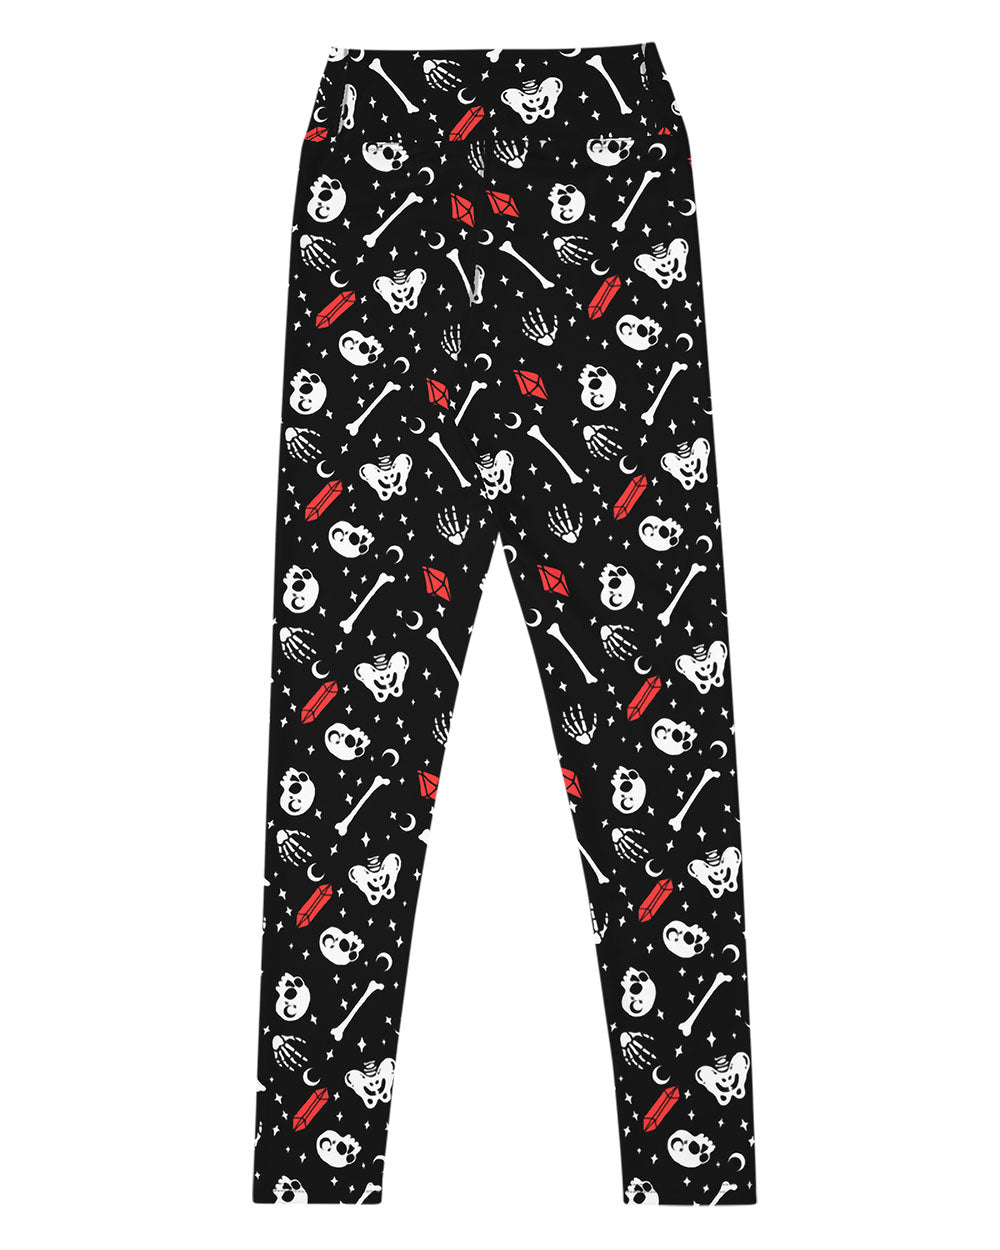 Skulls & Crystals Yoga Leggings  - UPF 50+ Protection from 98% of harmful rays - Vegan Witchy Dark Academia Gothic Clothing - Alternative Occult Ethical Fashion - On Demand Eco-friendly Sustainable Product